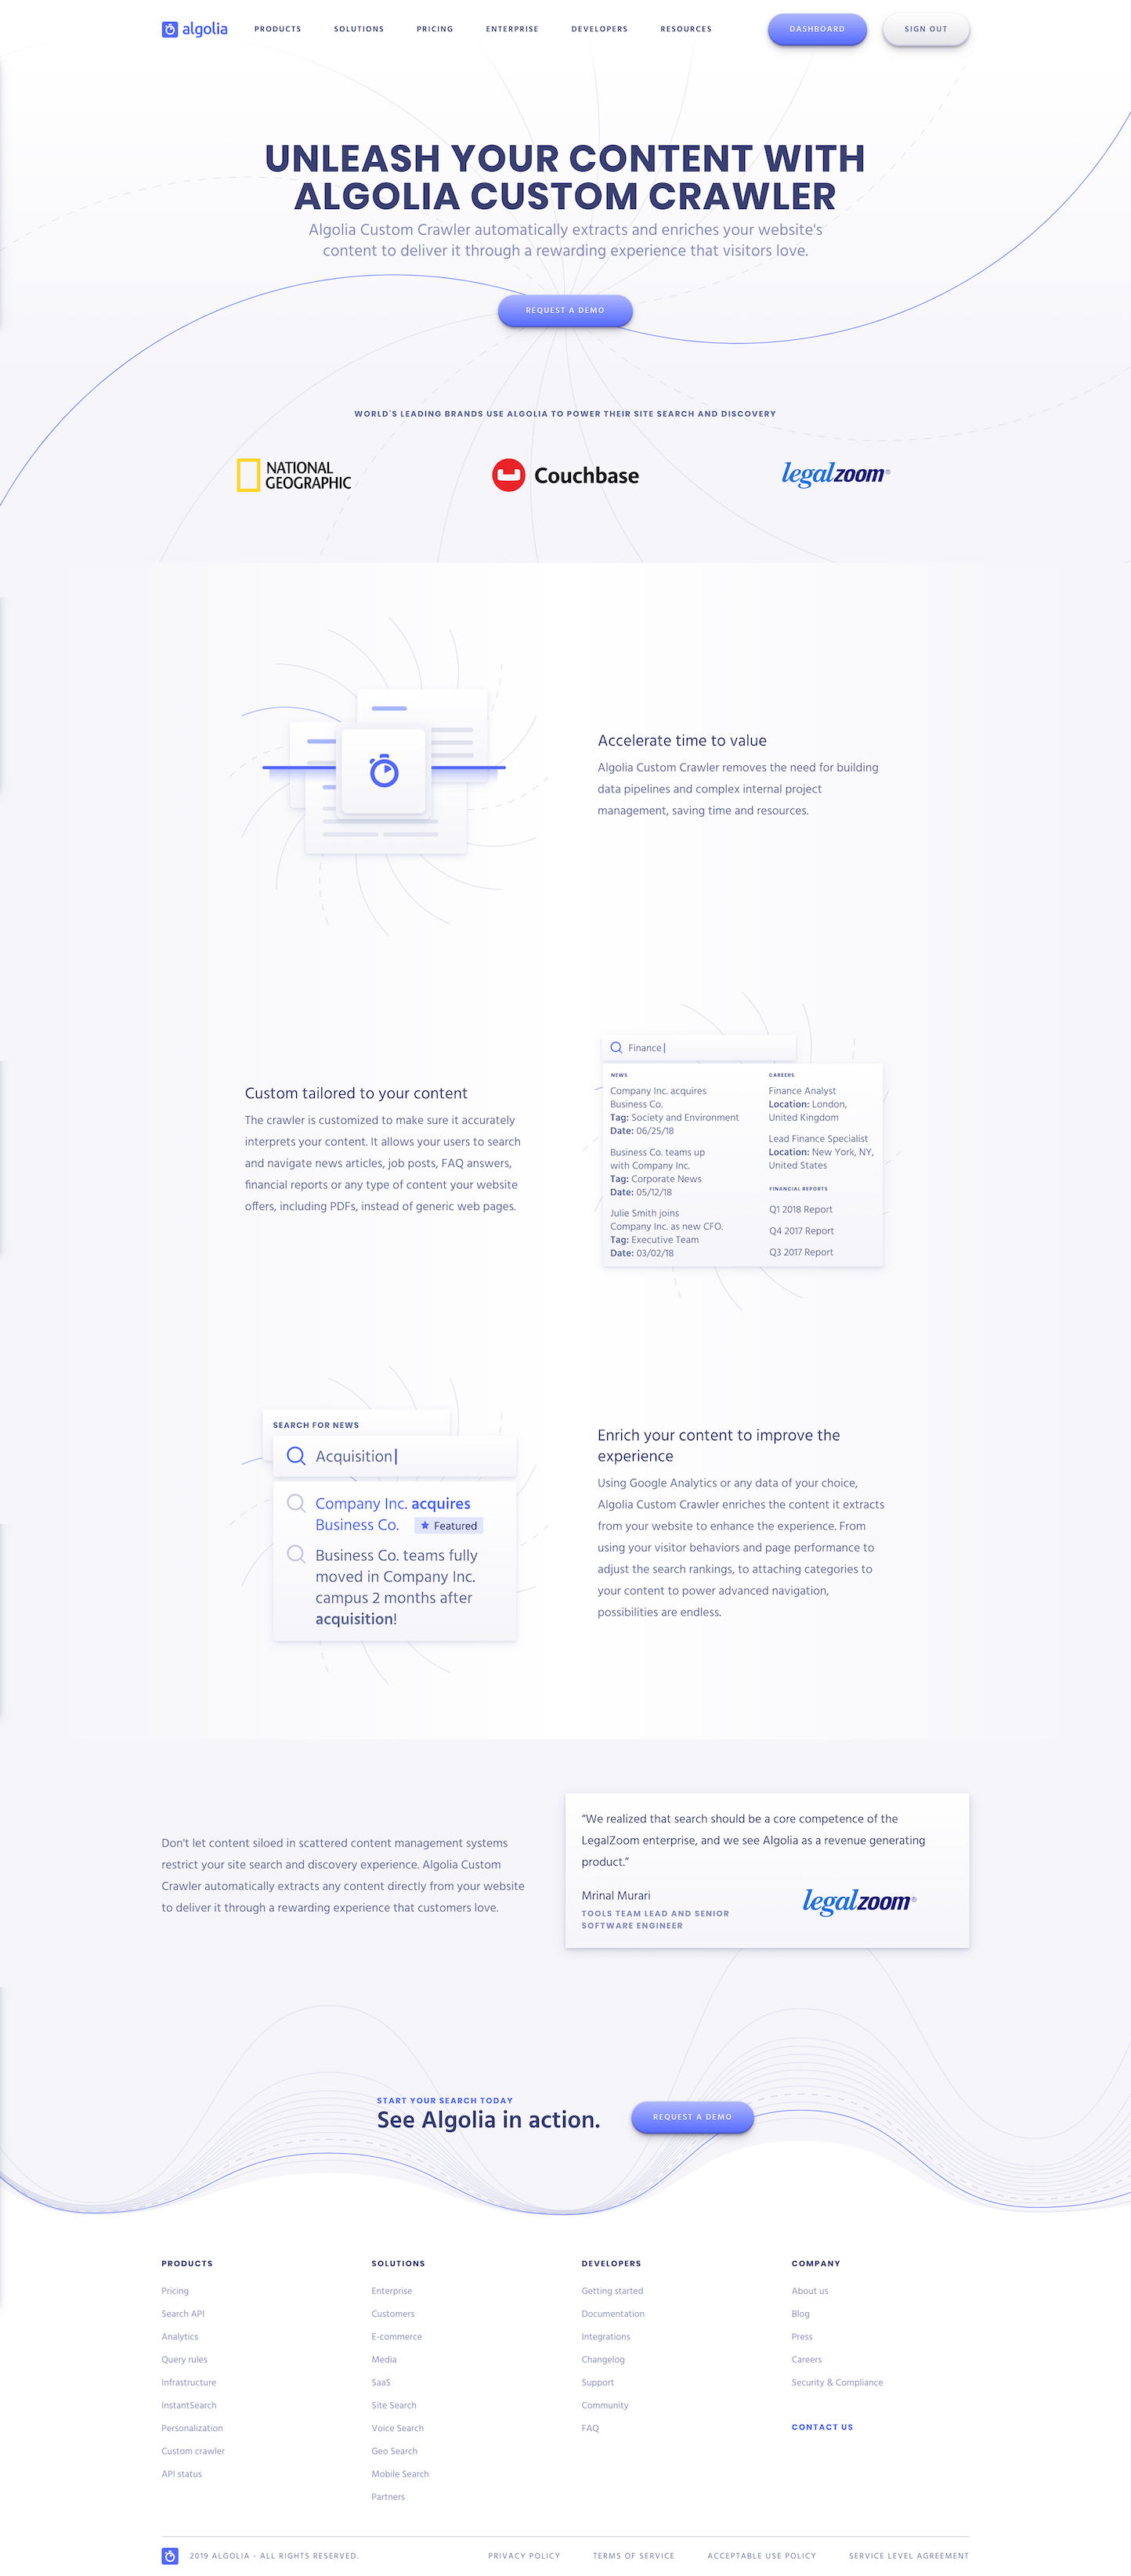 Screenshot of the Product - Crawler page from the Algolia website.